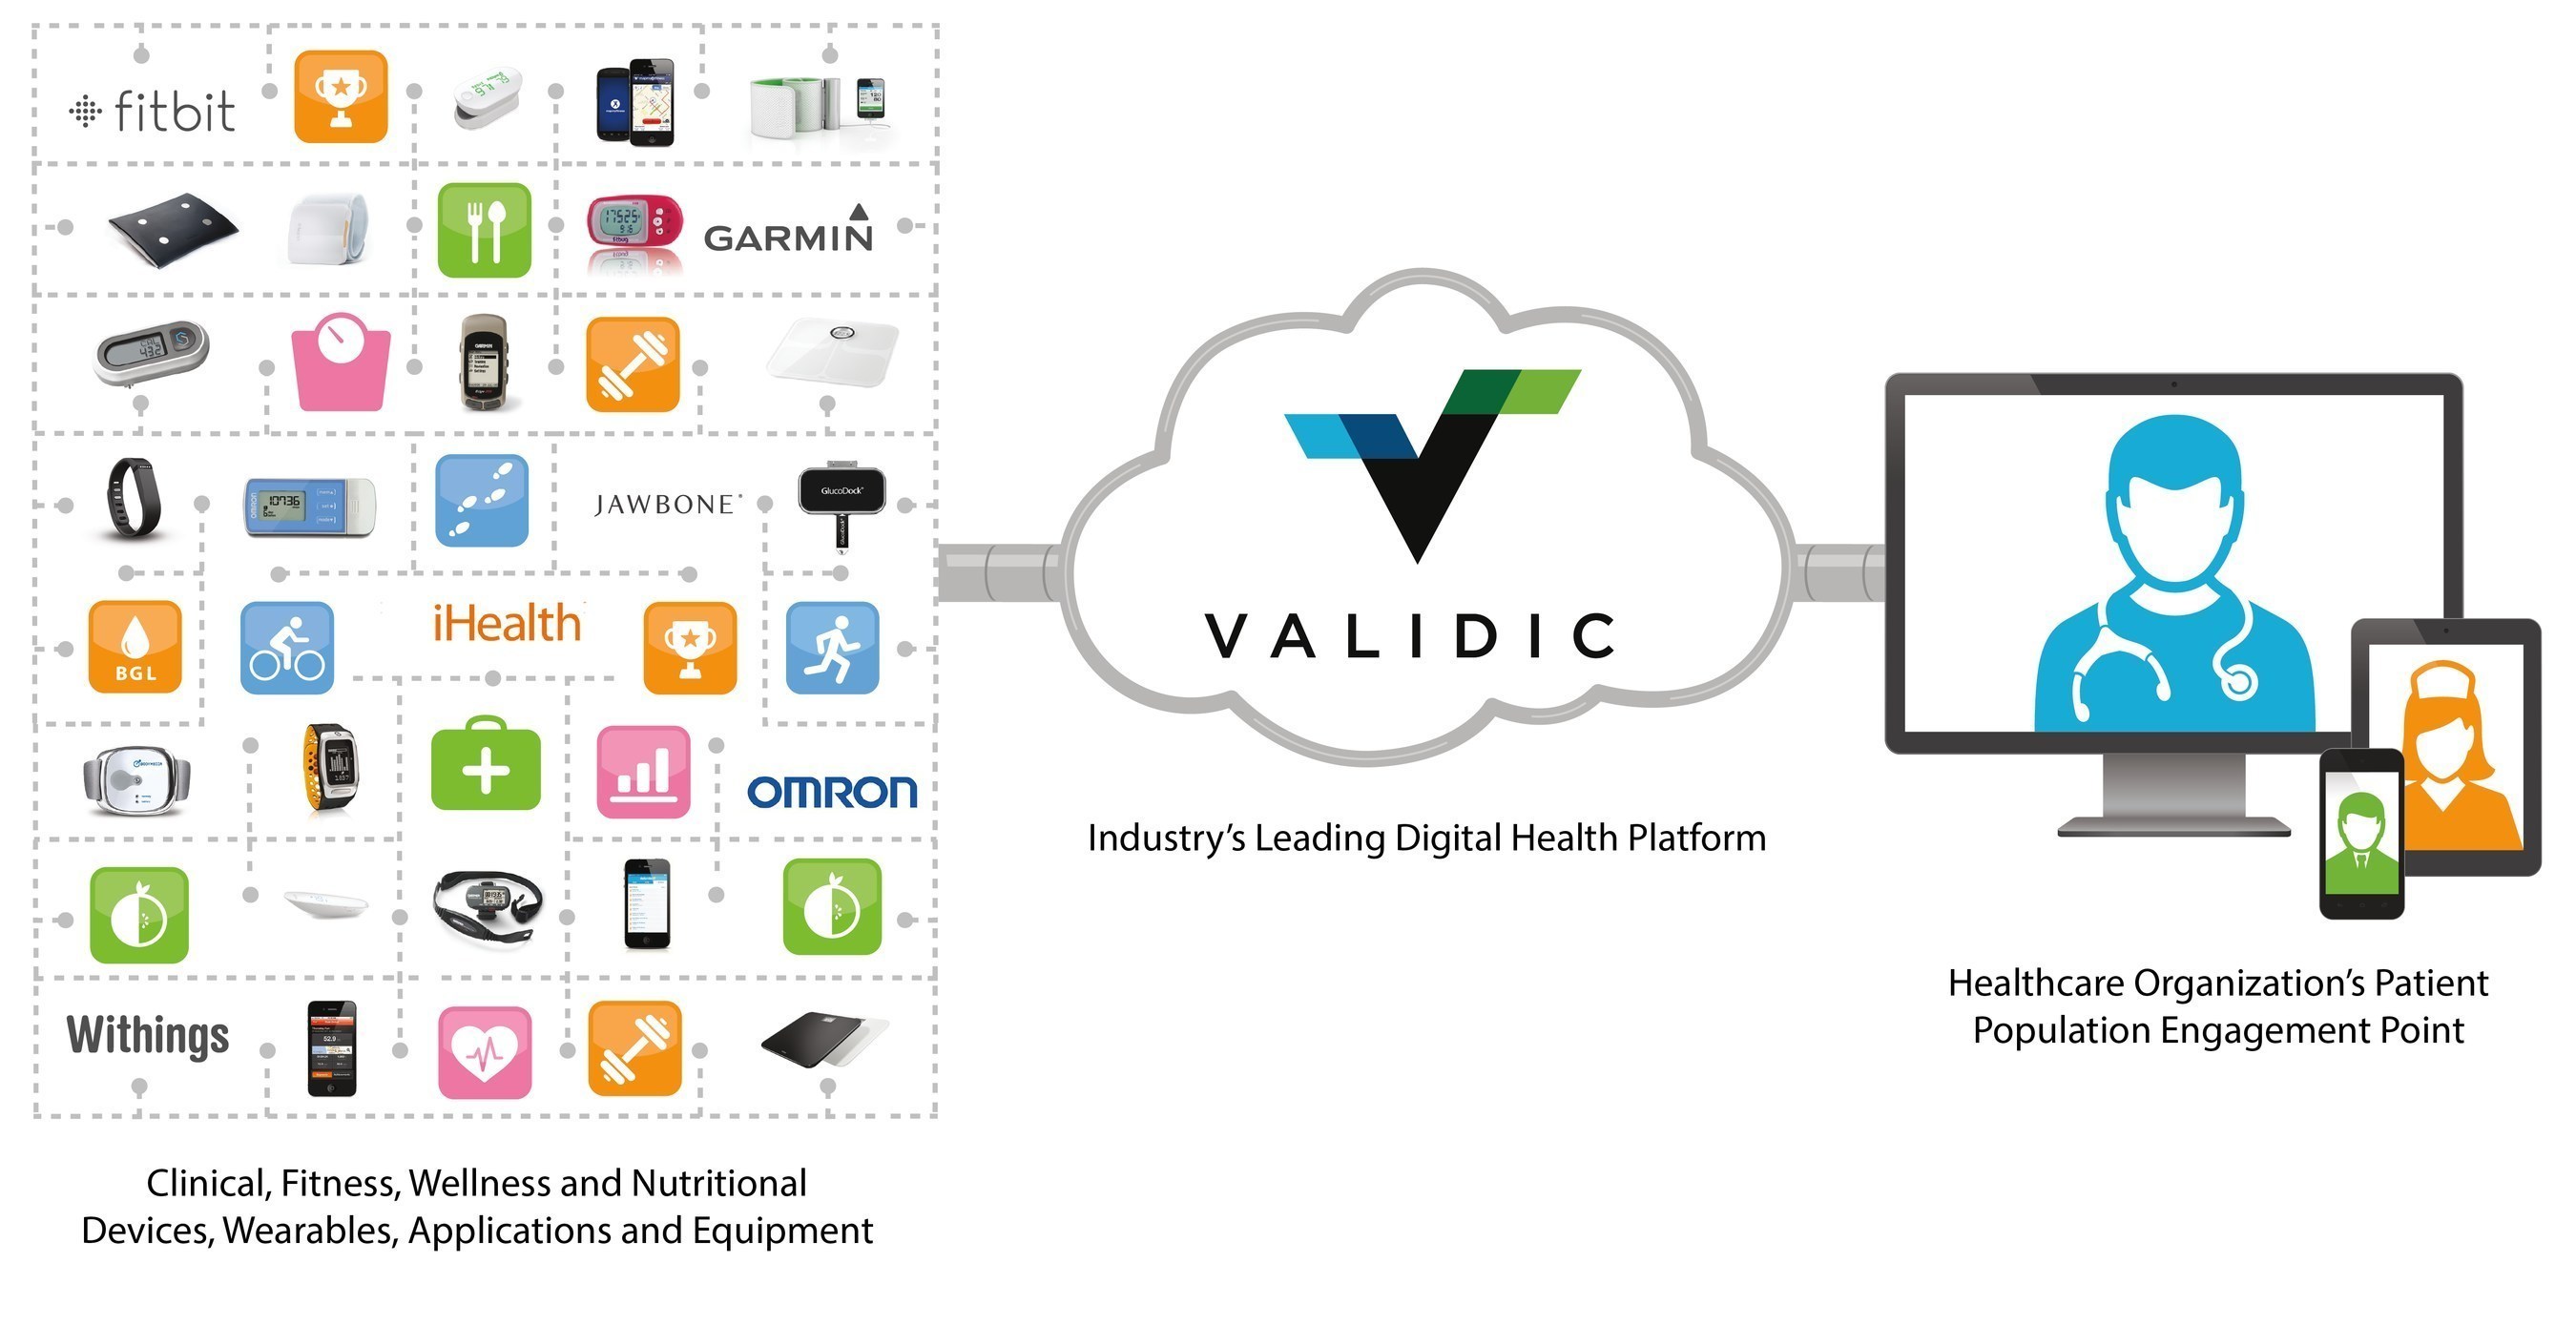 Validic is the healthcare industry's premier technology platform for convenient, easy data access to mobile health and clinical devices, wearables, and applications. More and more companies - including hospitals, payers, pharma, and wellness companies - are choosing Validic to help them accelerate their mobile health strategies. Validic recently received a healthcare award from Gartner, and was voted "Best Value in Healthcare Information Interoperability" by Frost & Sullivan.